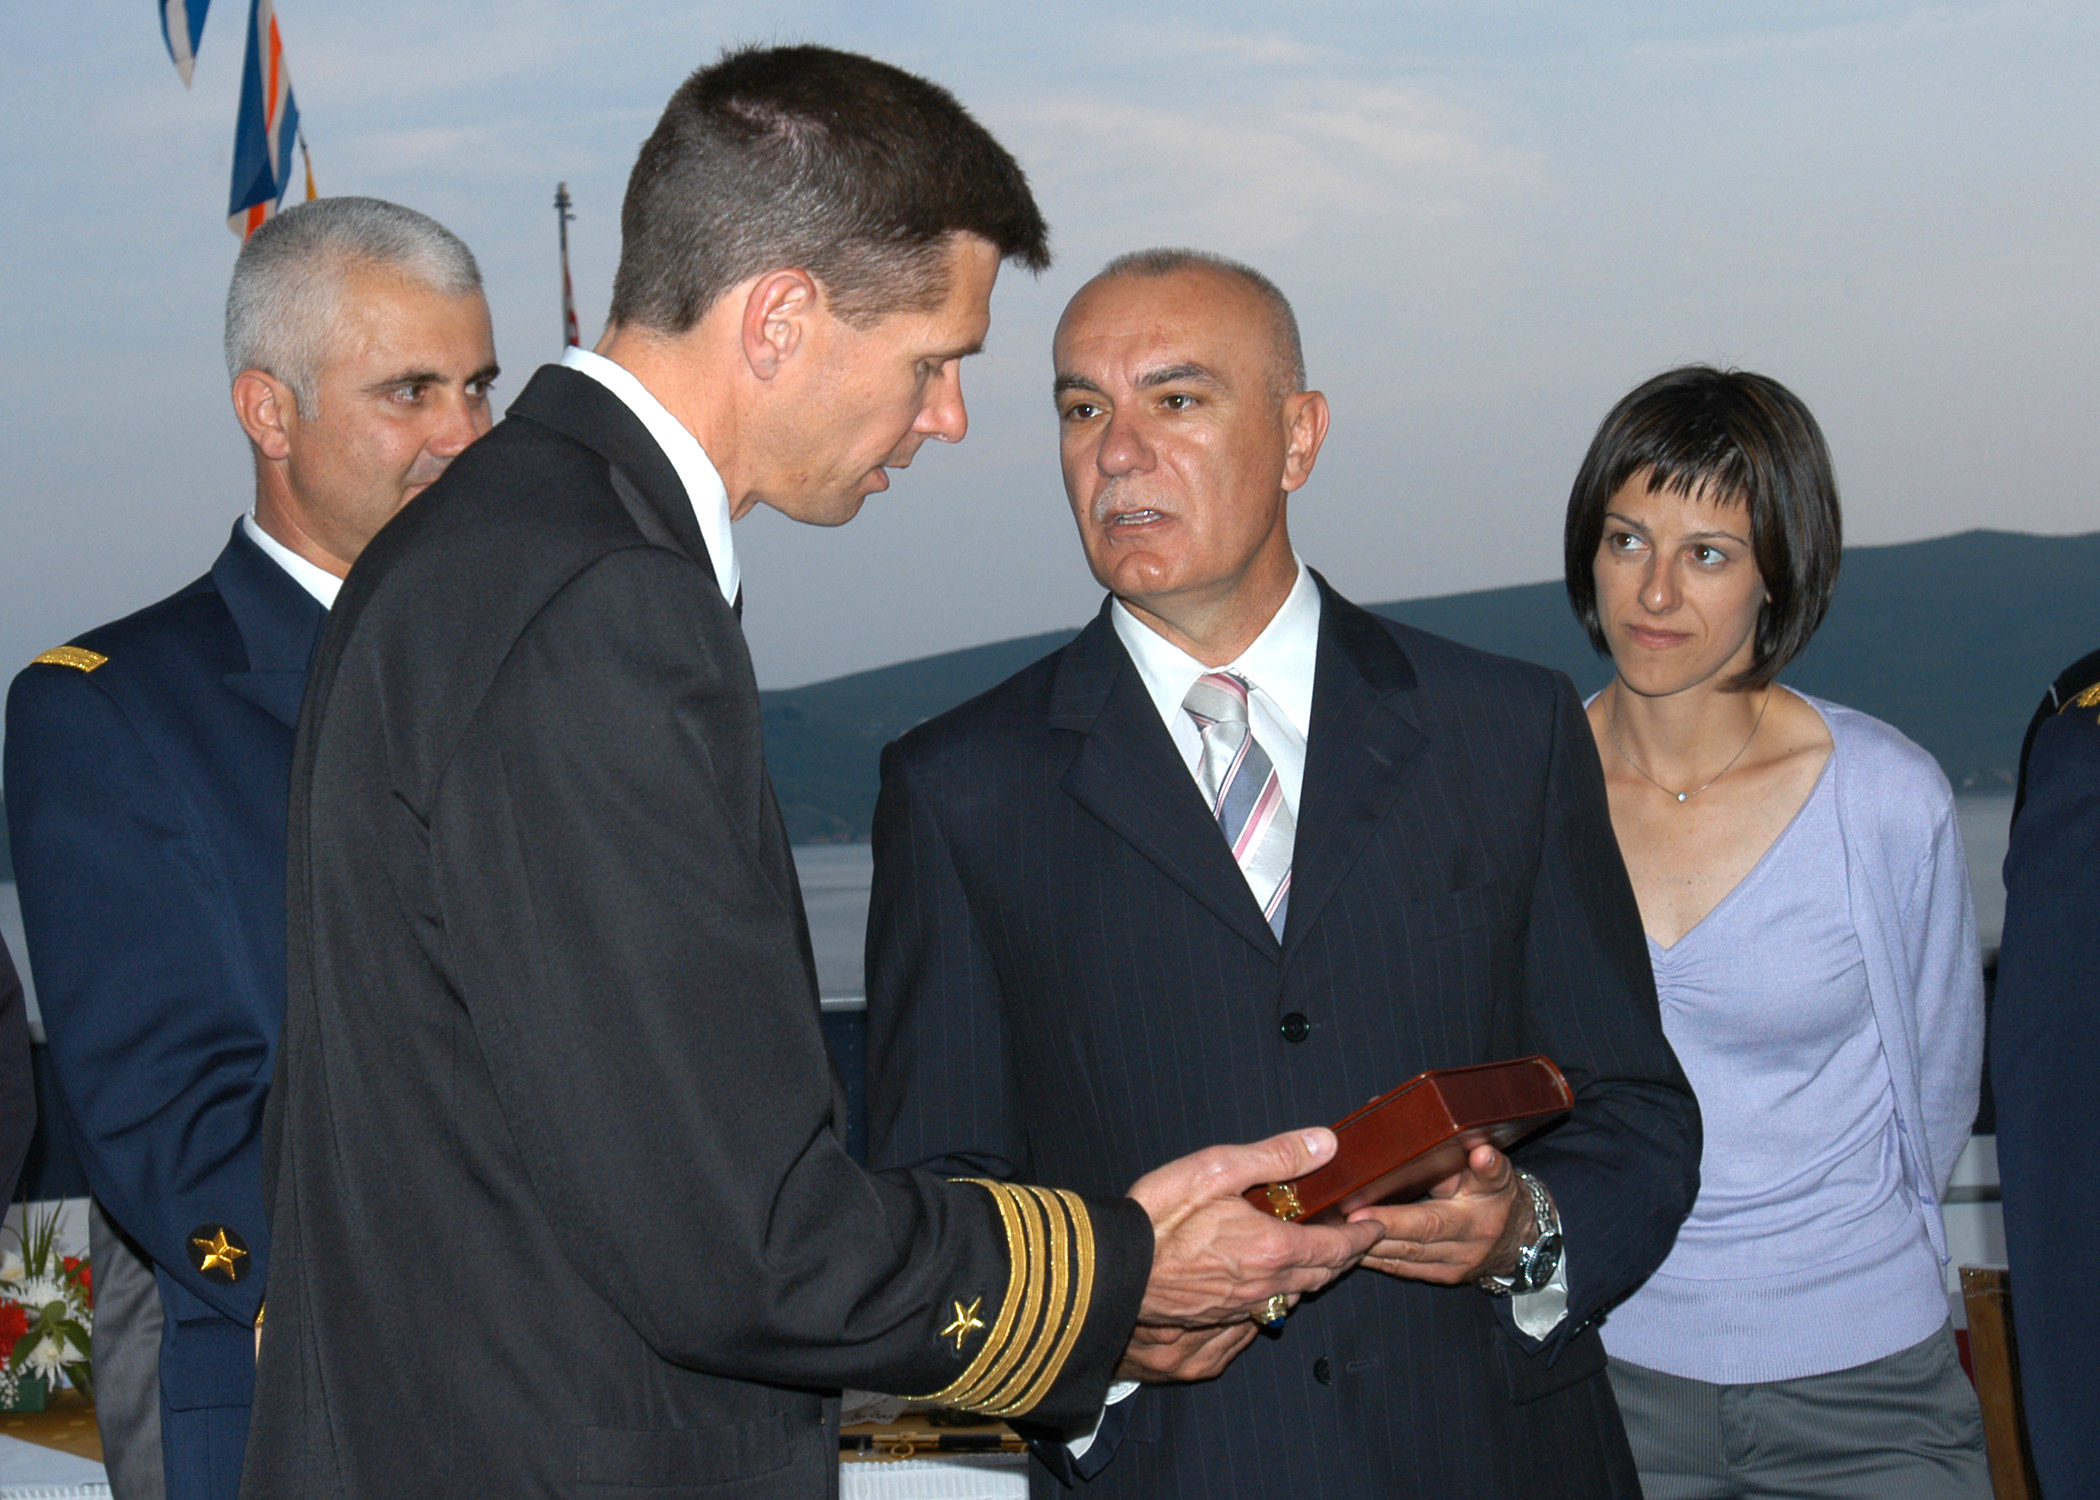 Minister of Defense Boro Vucinic and USS Emory S. Land (AS_39) Commanding Officer, Capt. Jeffrey M. Hughes, exchange gifts during a reception on board the Emory S. Land to celebrate Montenegro's first year of independence.